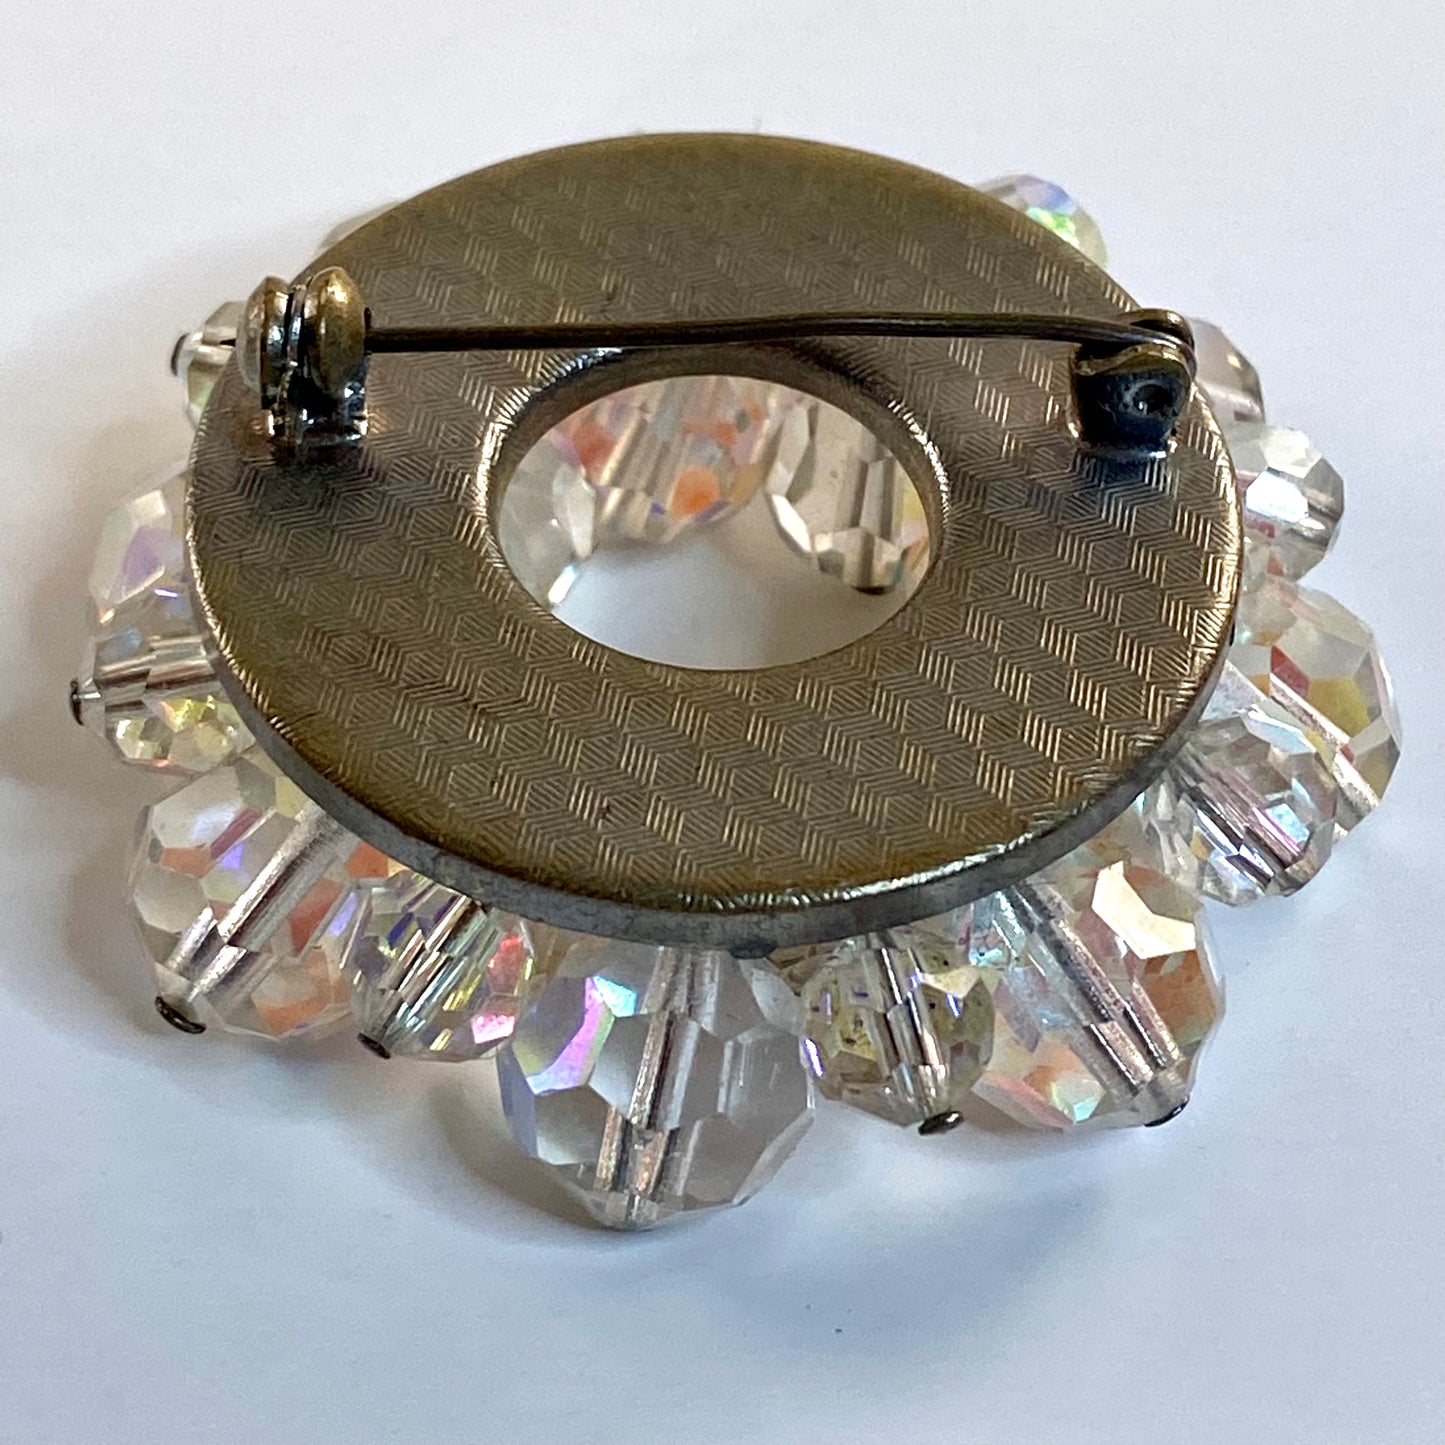 Late 50s/ Early 60s Glass Crystal Bead Circle Brooch